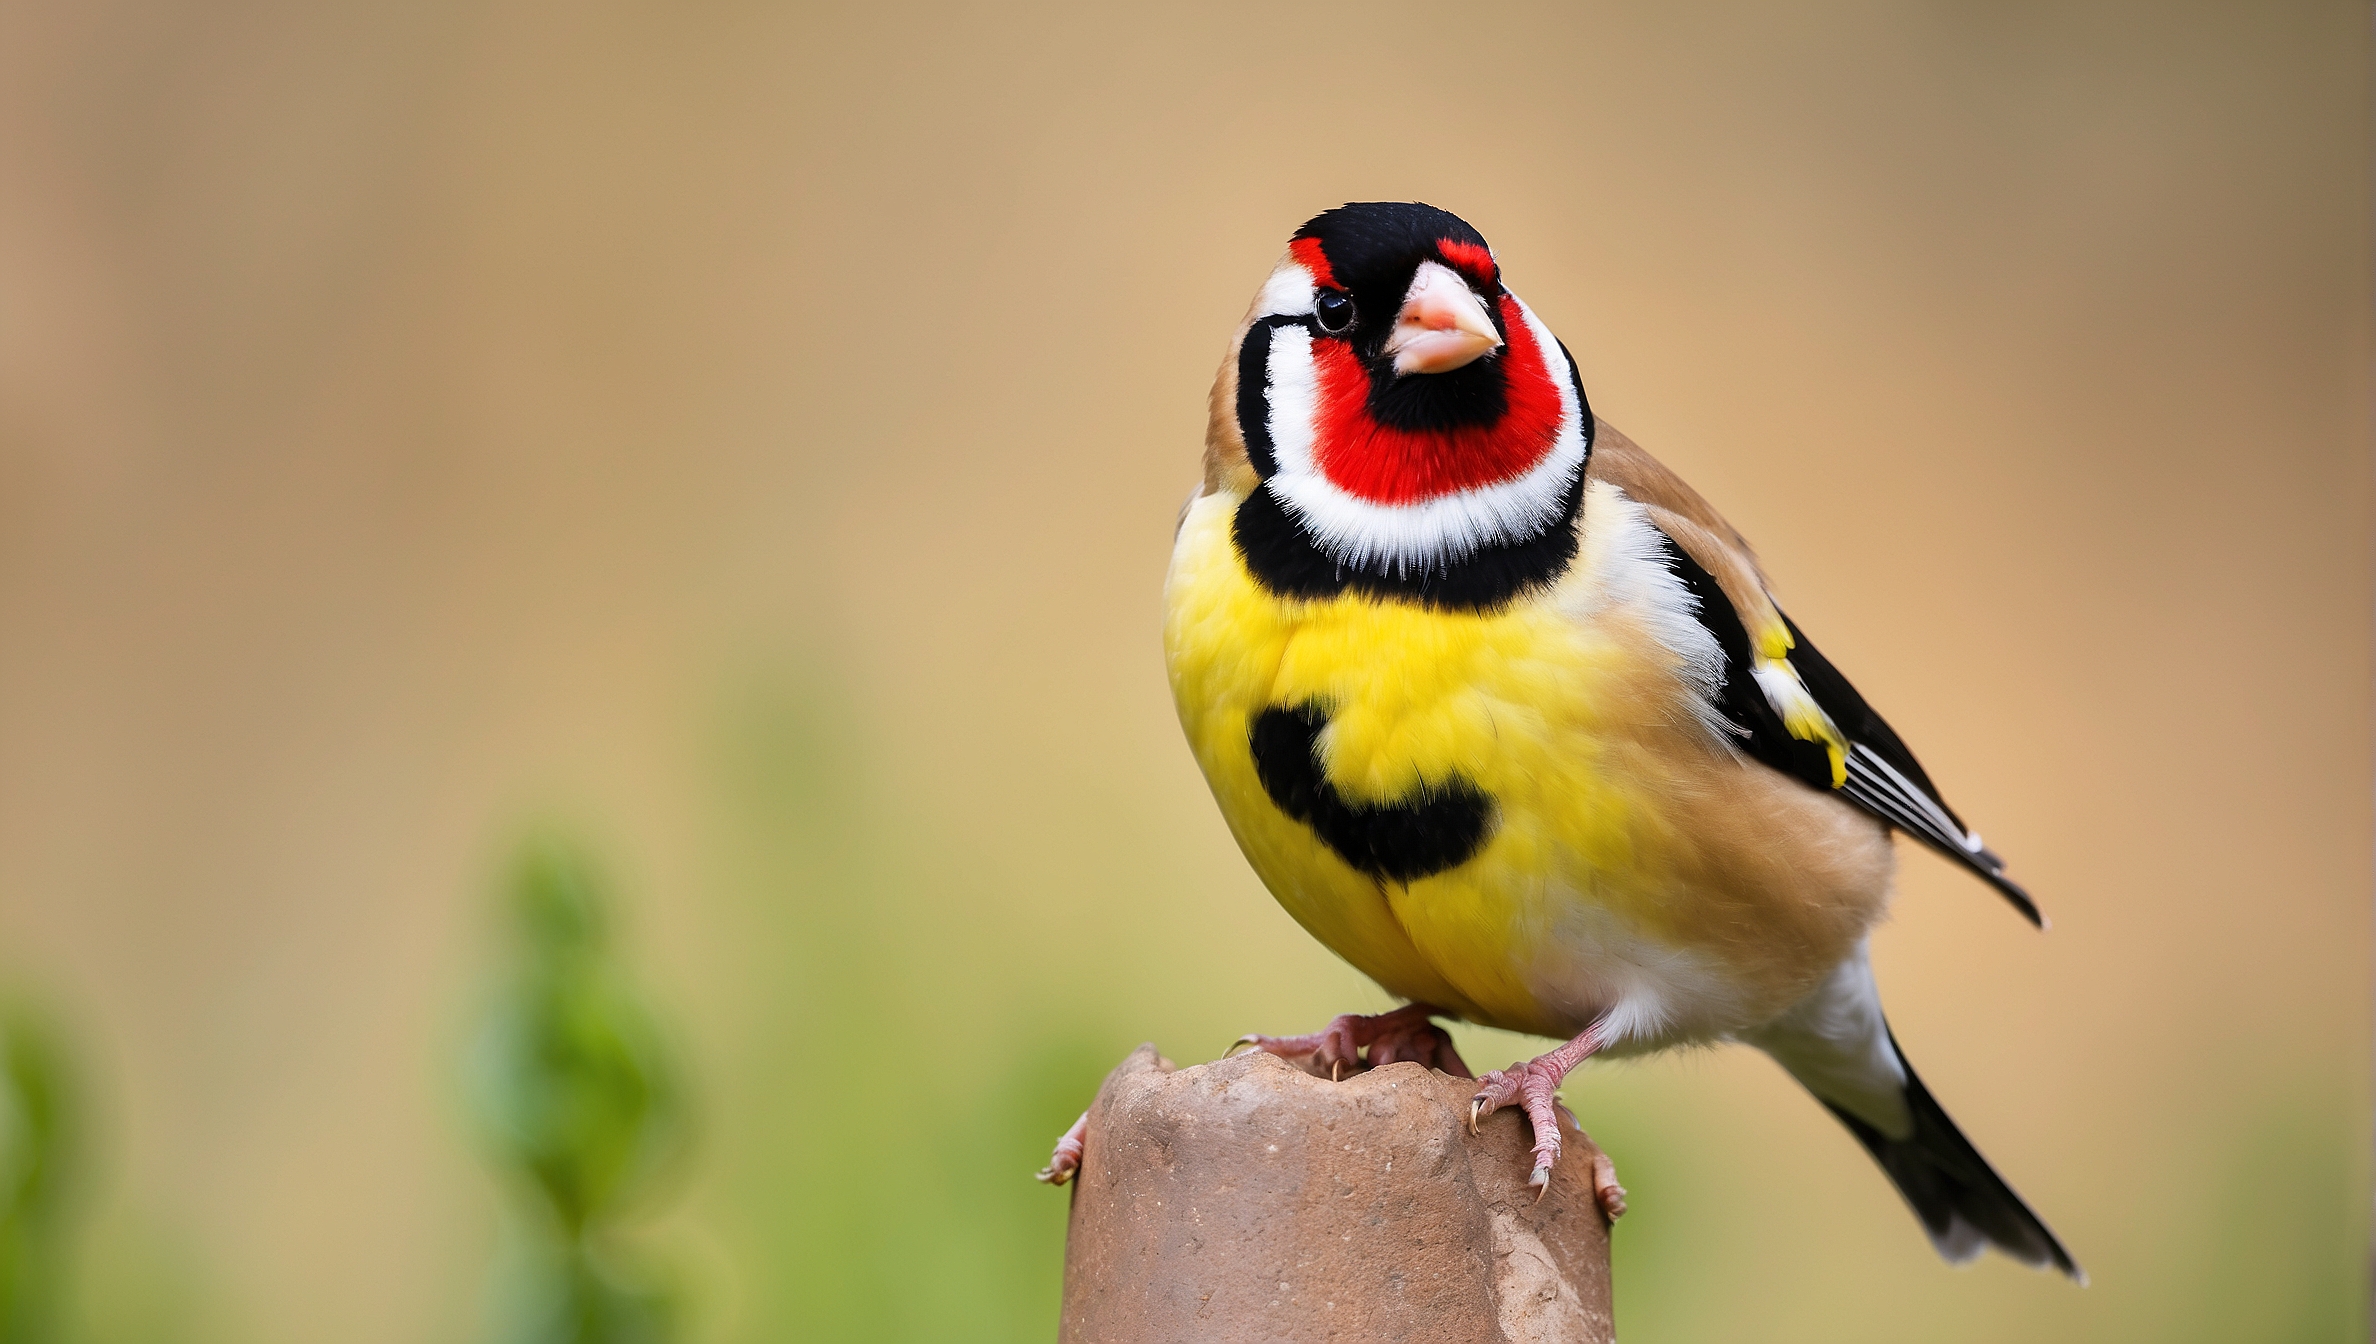 What Do Goldfinches Eat And Drink?